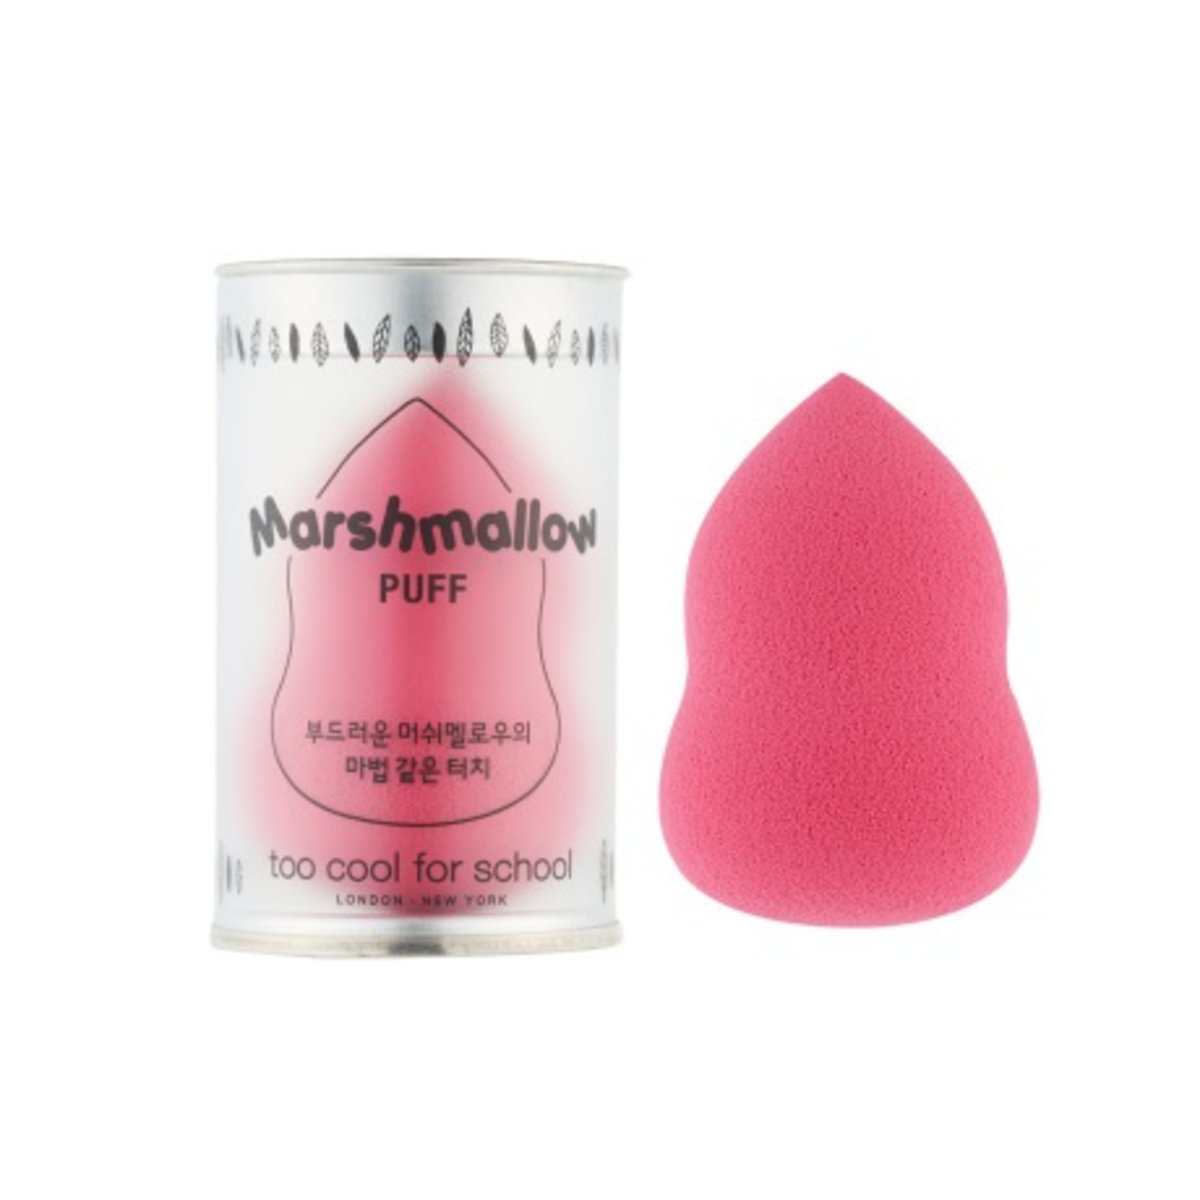 MASHMALLOW PUFF [parallel import]